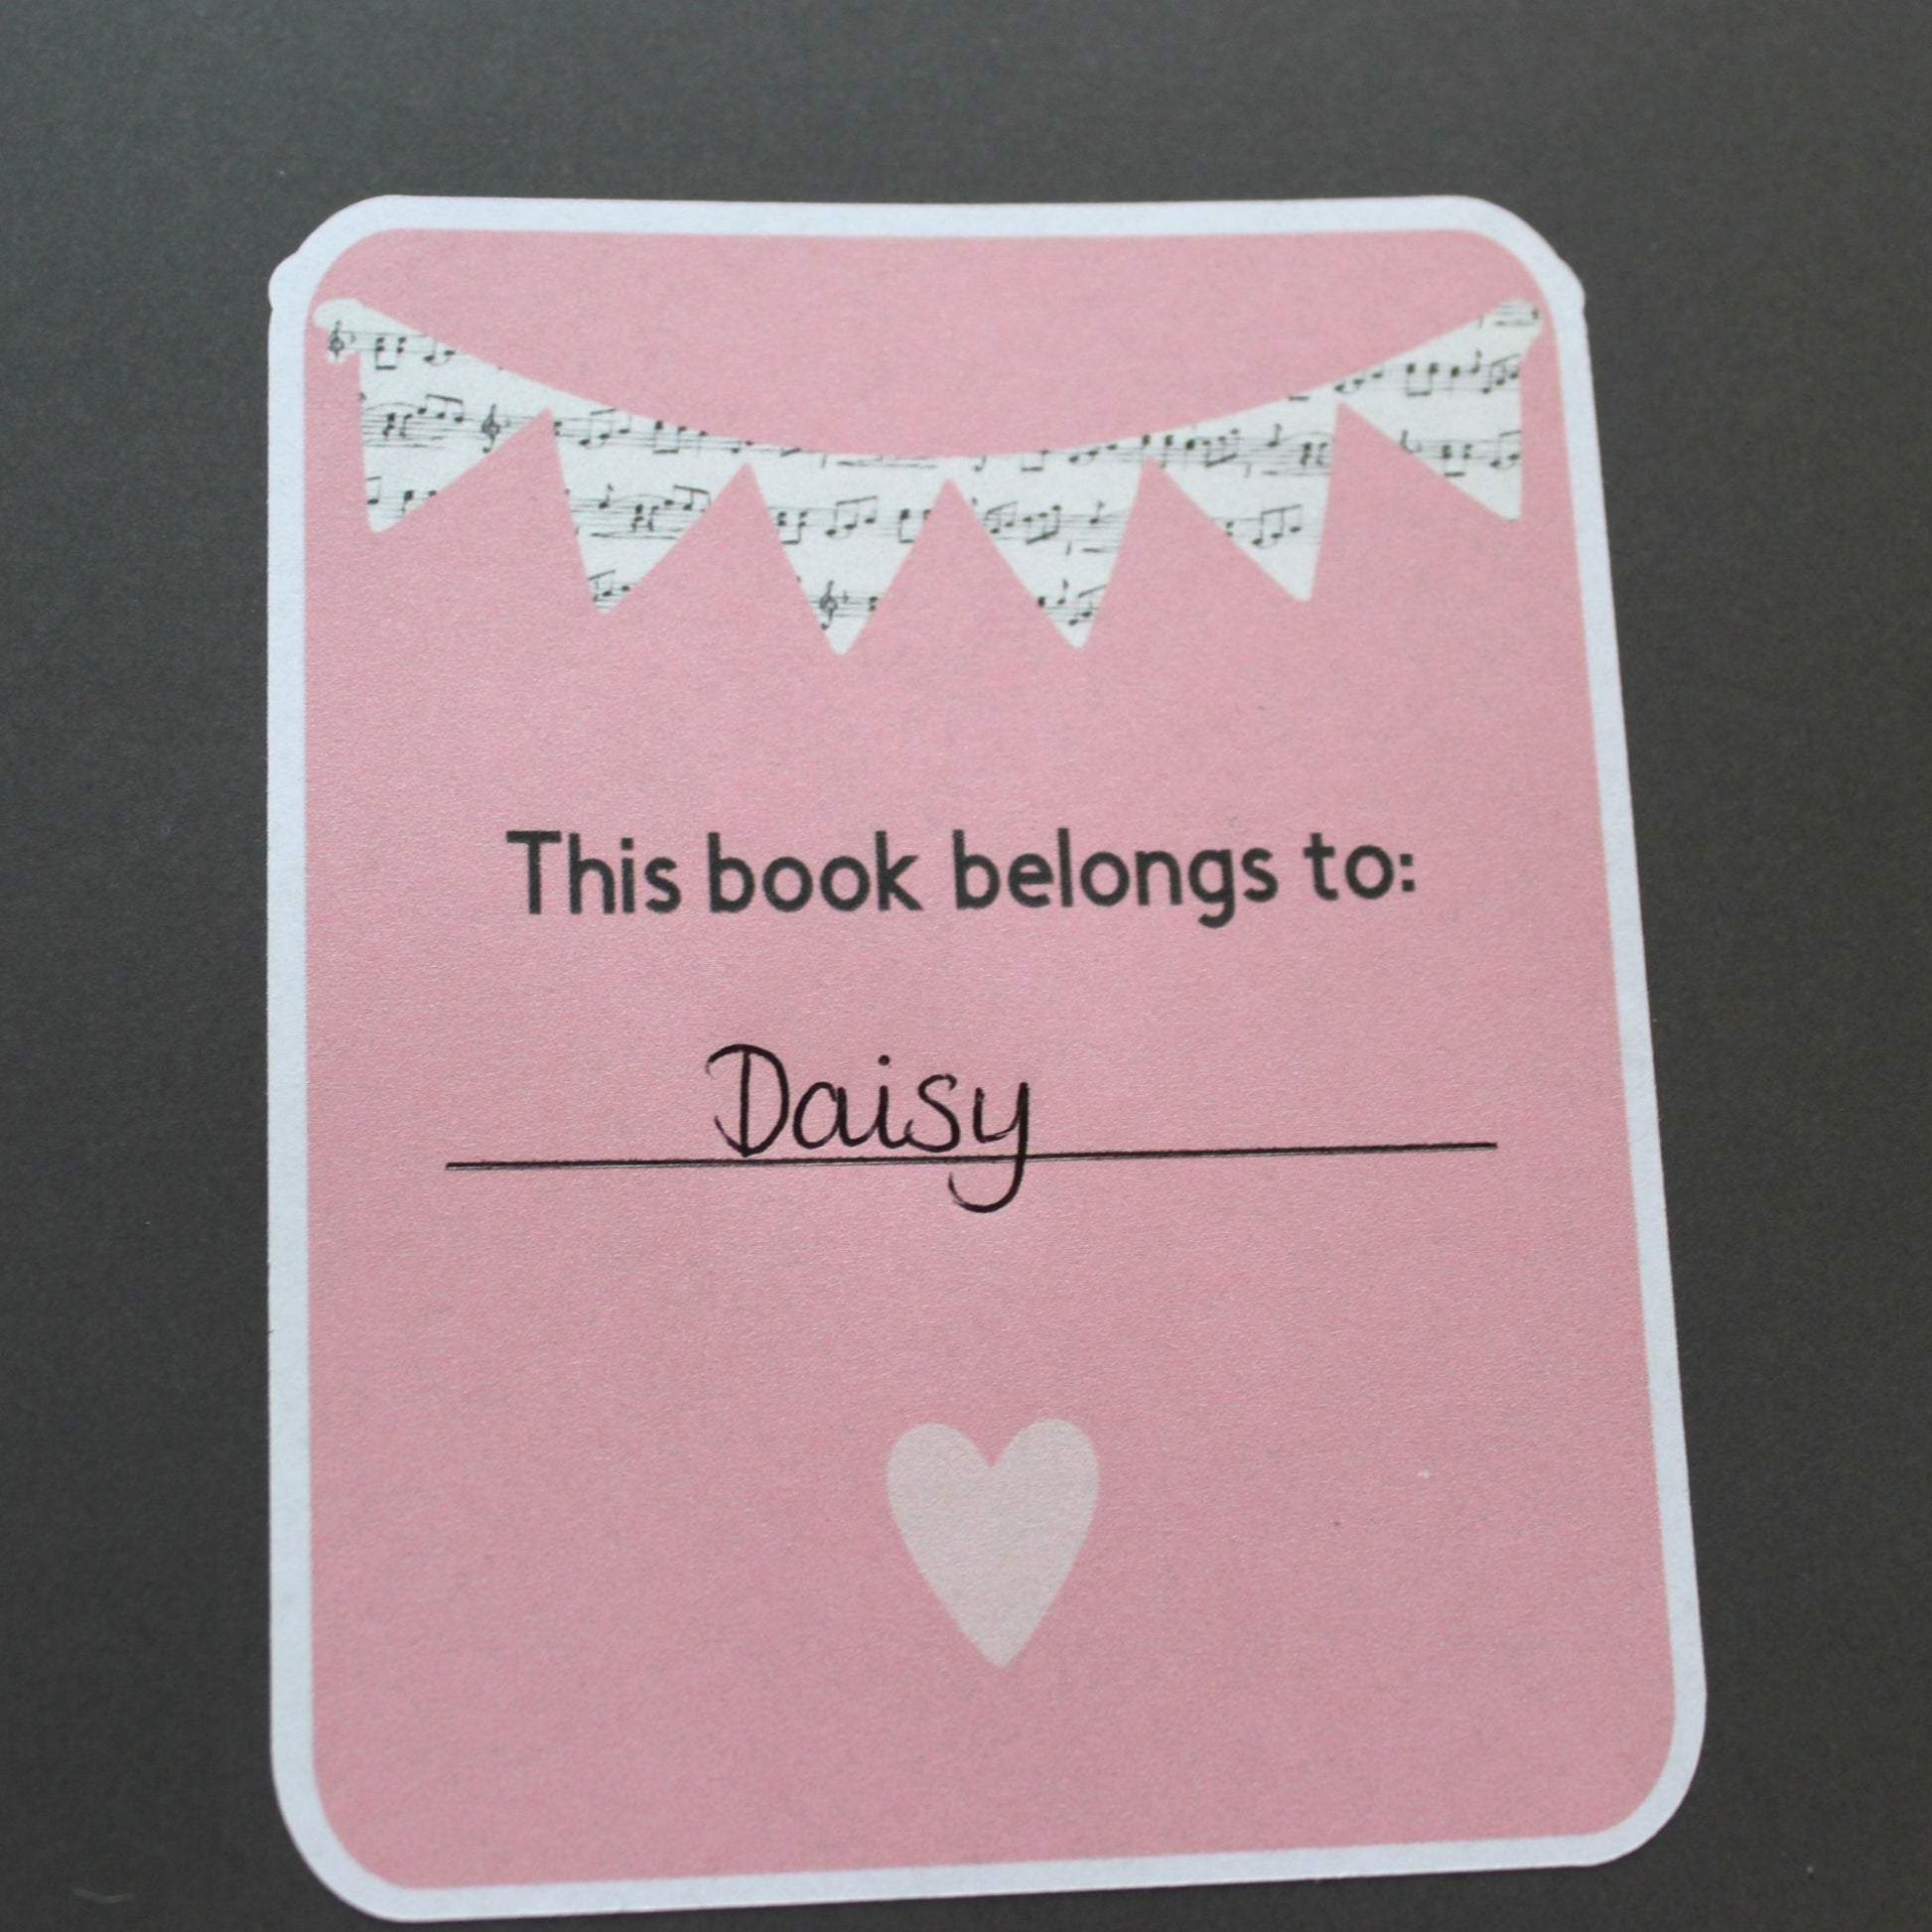 A pink bookplate with music bunting at the top and a heart below the text.